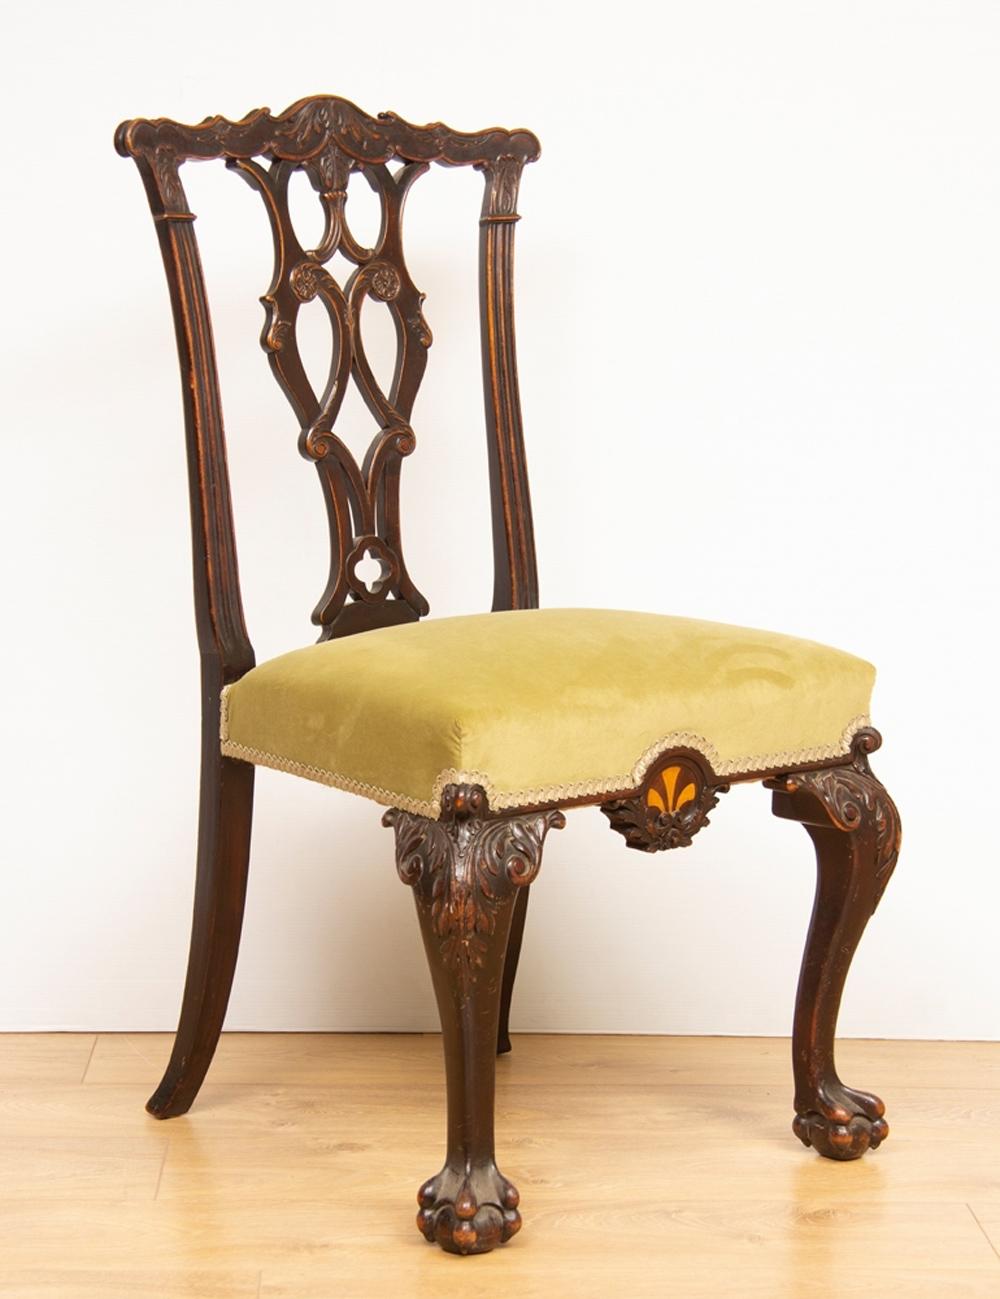 A pair of mahogany chairs with specimen wood inlay, circa 1860.
These chairs are very good quality mid-Victorian copies of a Chippendale period chair.
     